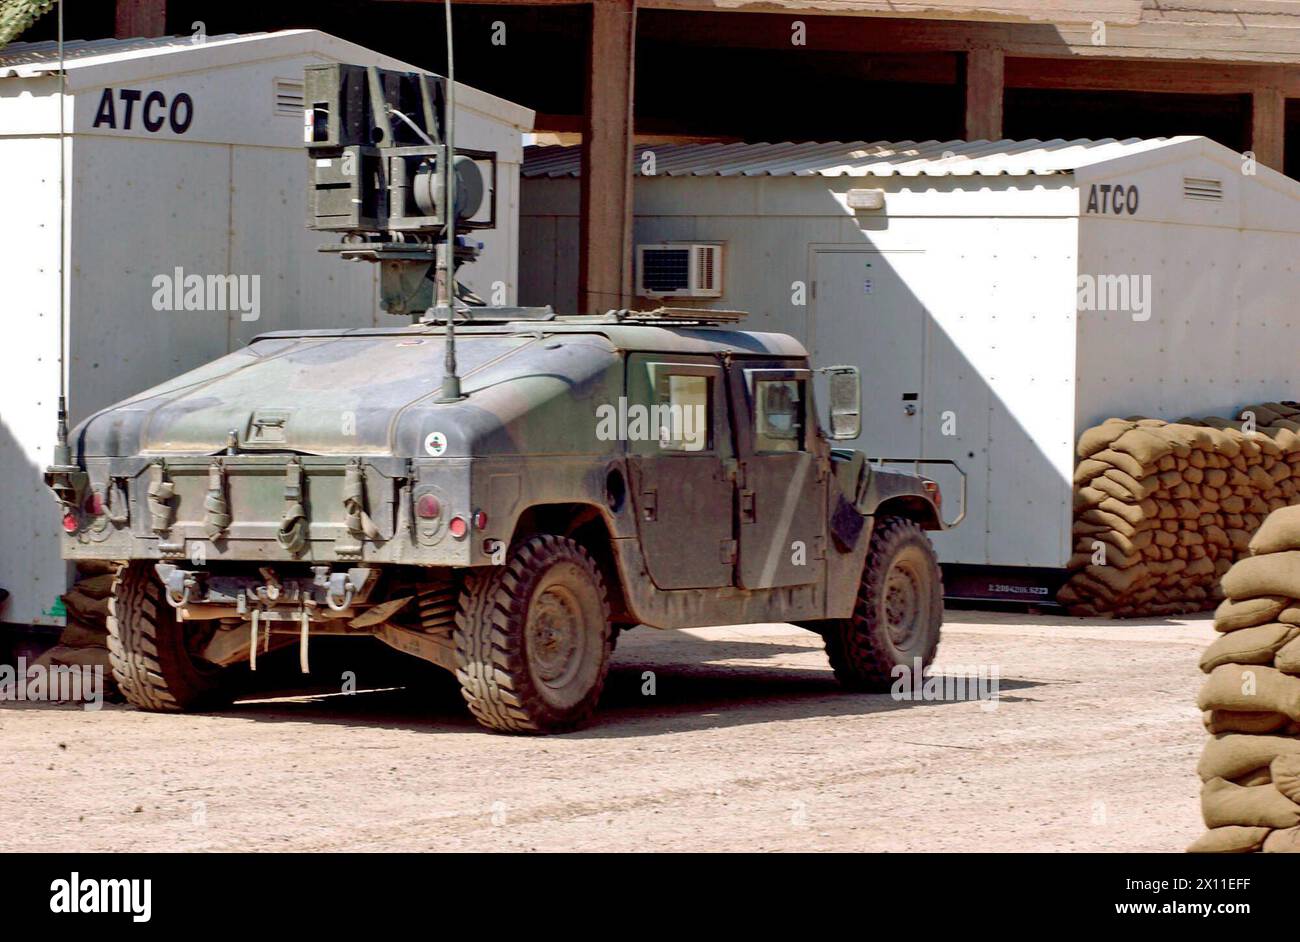 The distinct loud speaker mounted to the top of their vehicle, part of the mission of a Tactical Psychological Operations Team is to broadcast pre-recorded and live messages to an area they patrol ca. April 05, 2004 Stock Photo